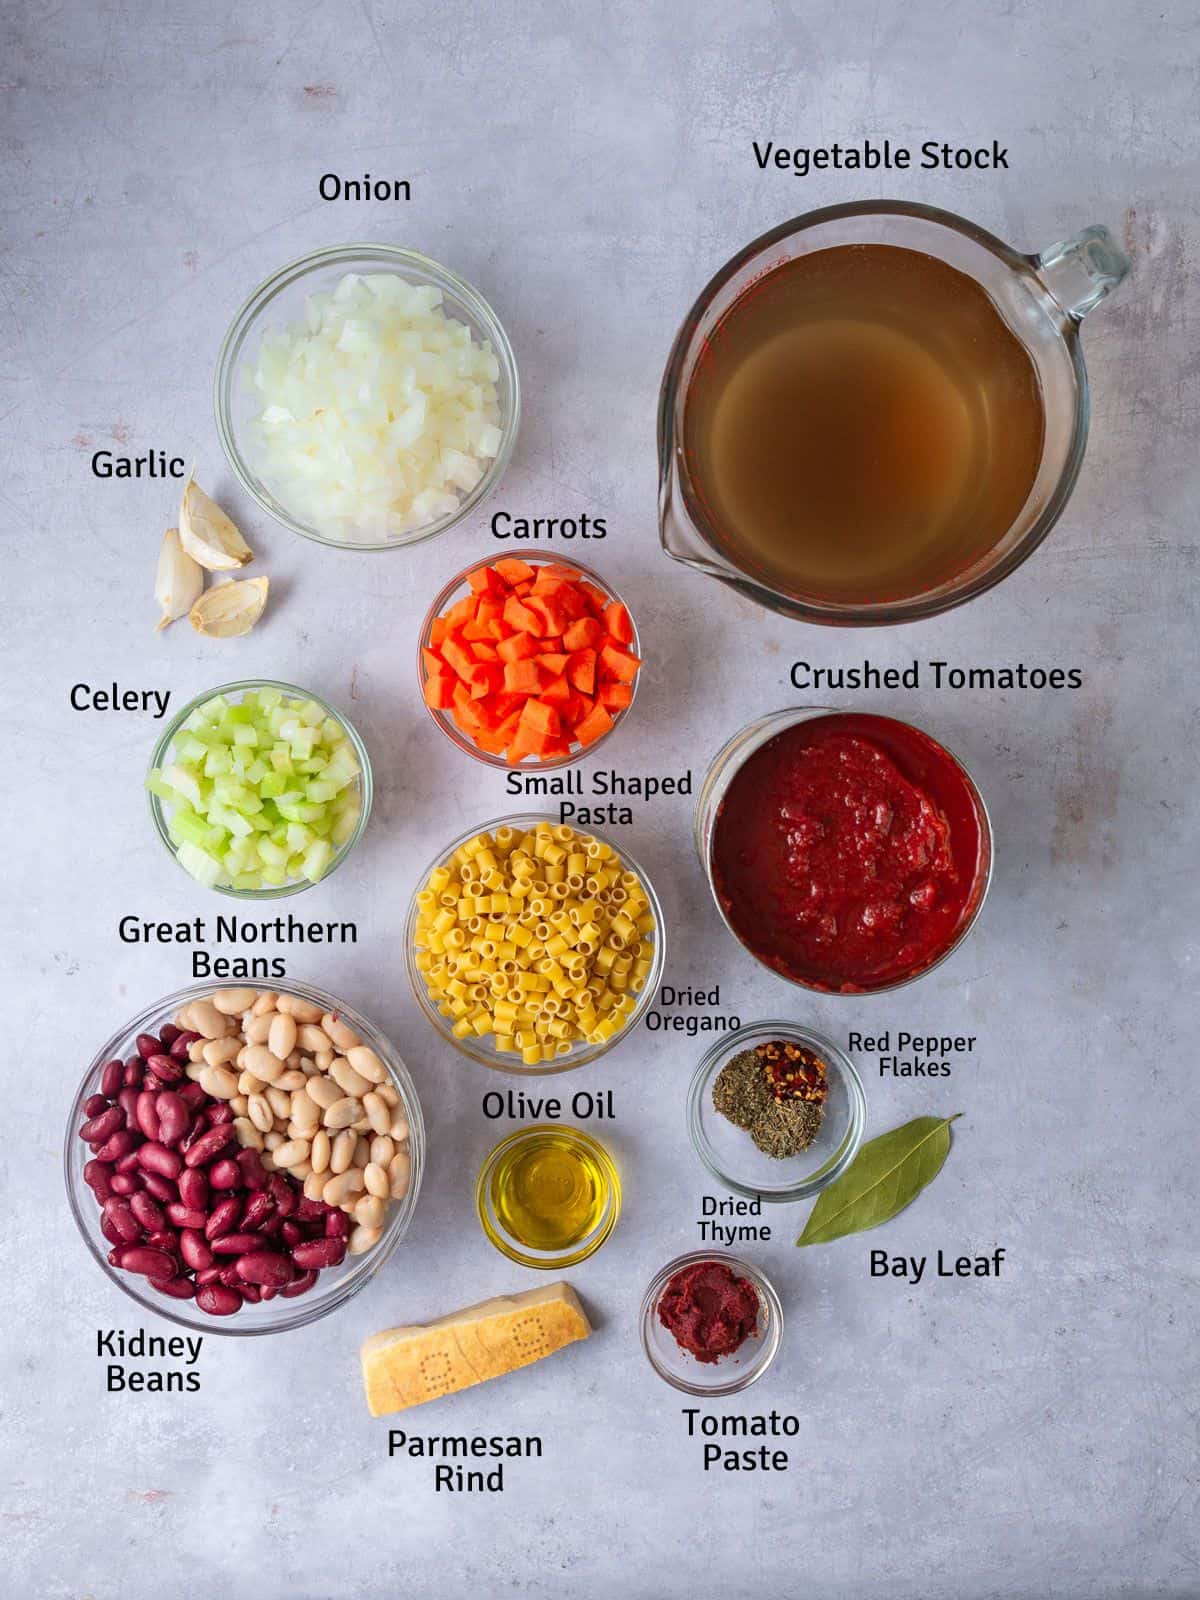 Ingredients for vegetarian pasta fagioli, including beans, pasta, parmesan rind, vegetables and spices.